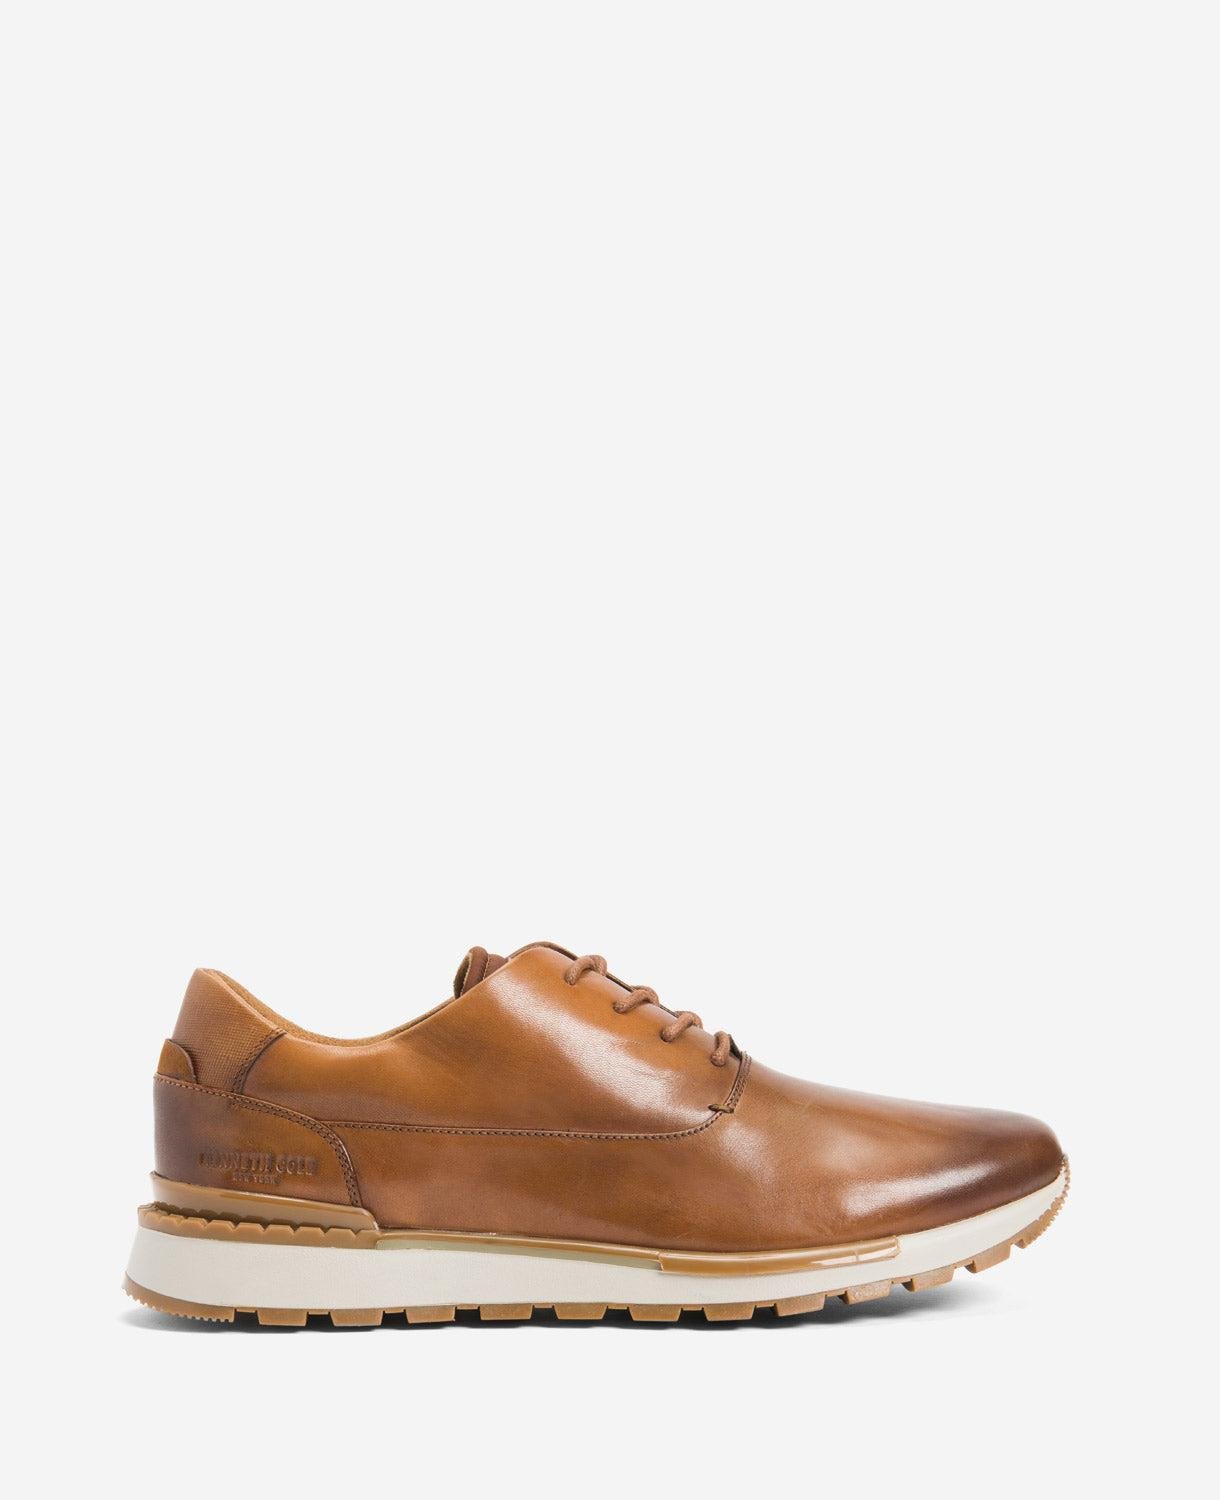 Kenneth Cole | Kev Leather Lace-Up With Techni-cole by KENNETH COLE